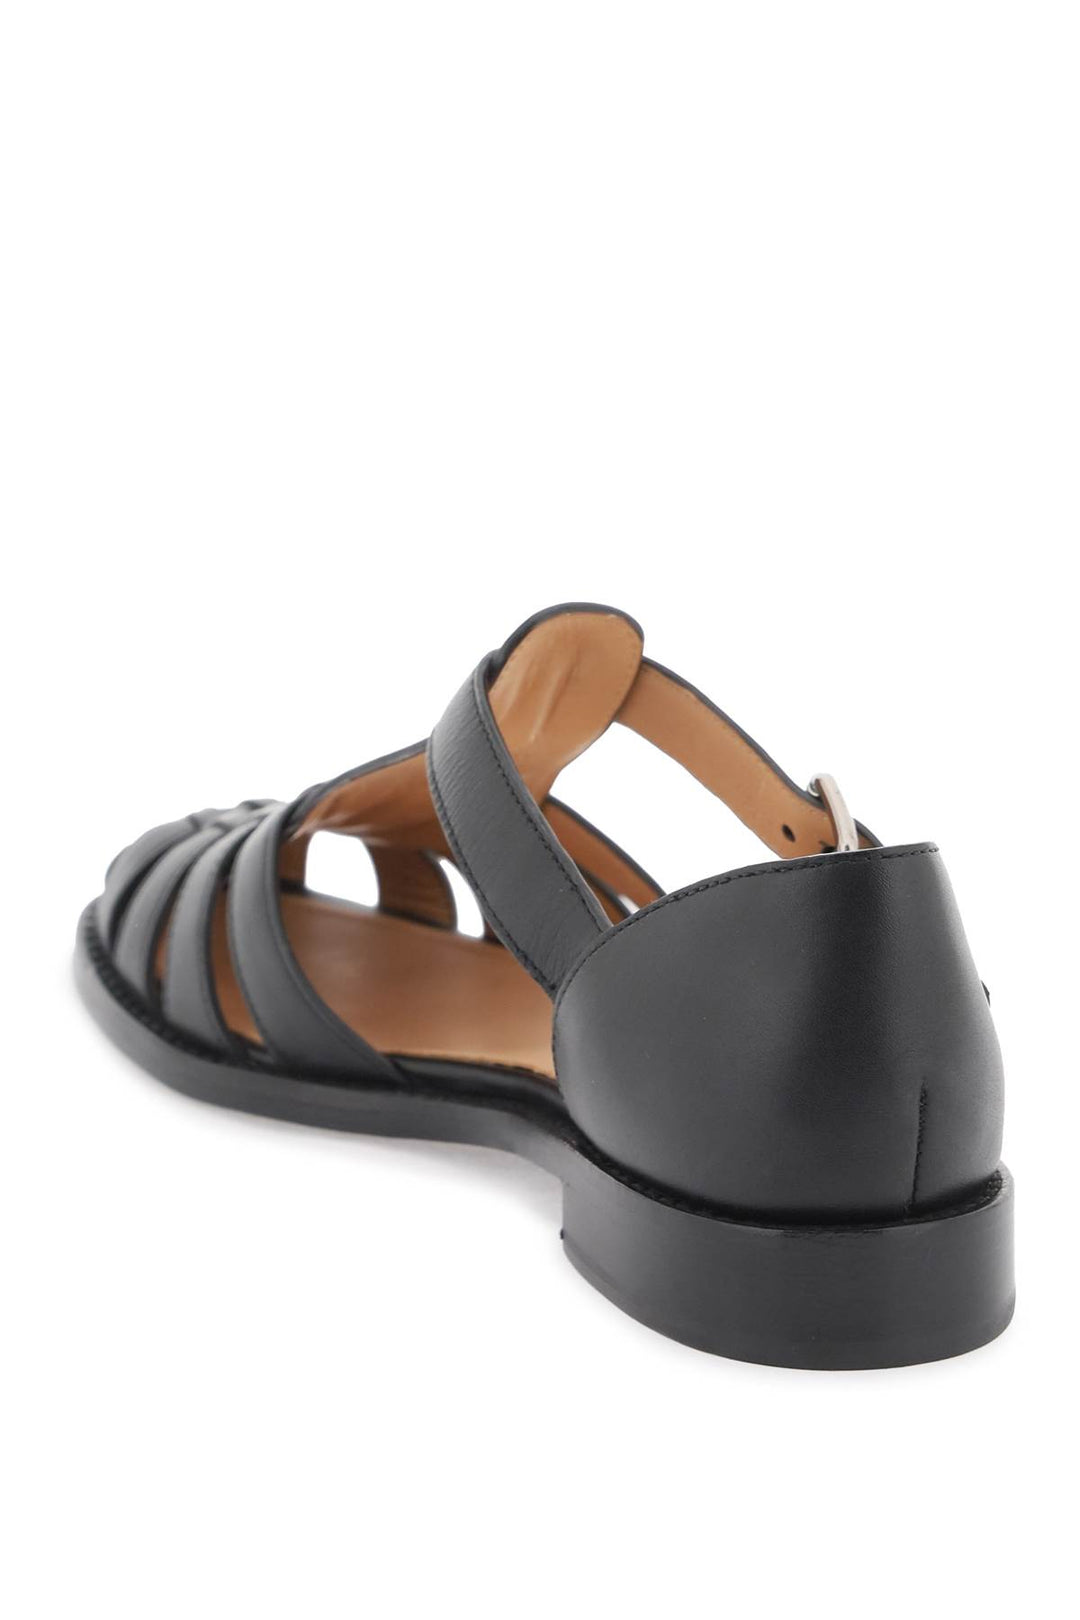 Church's Kelsey Cage Sandals   Black